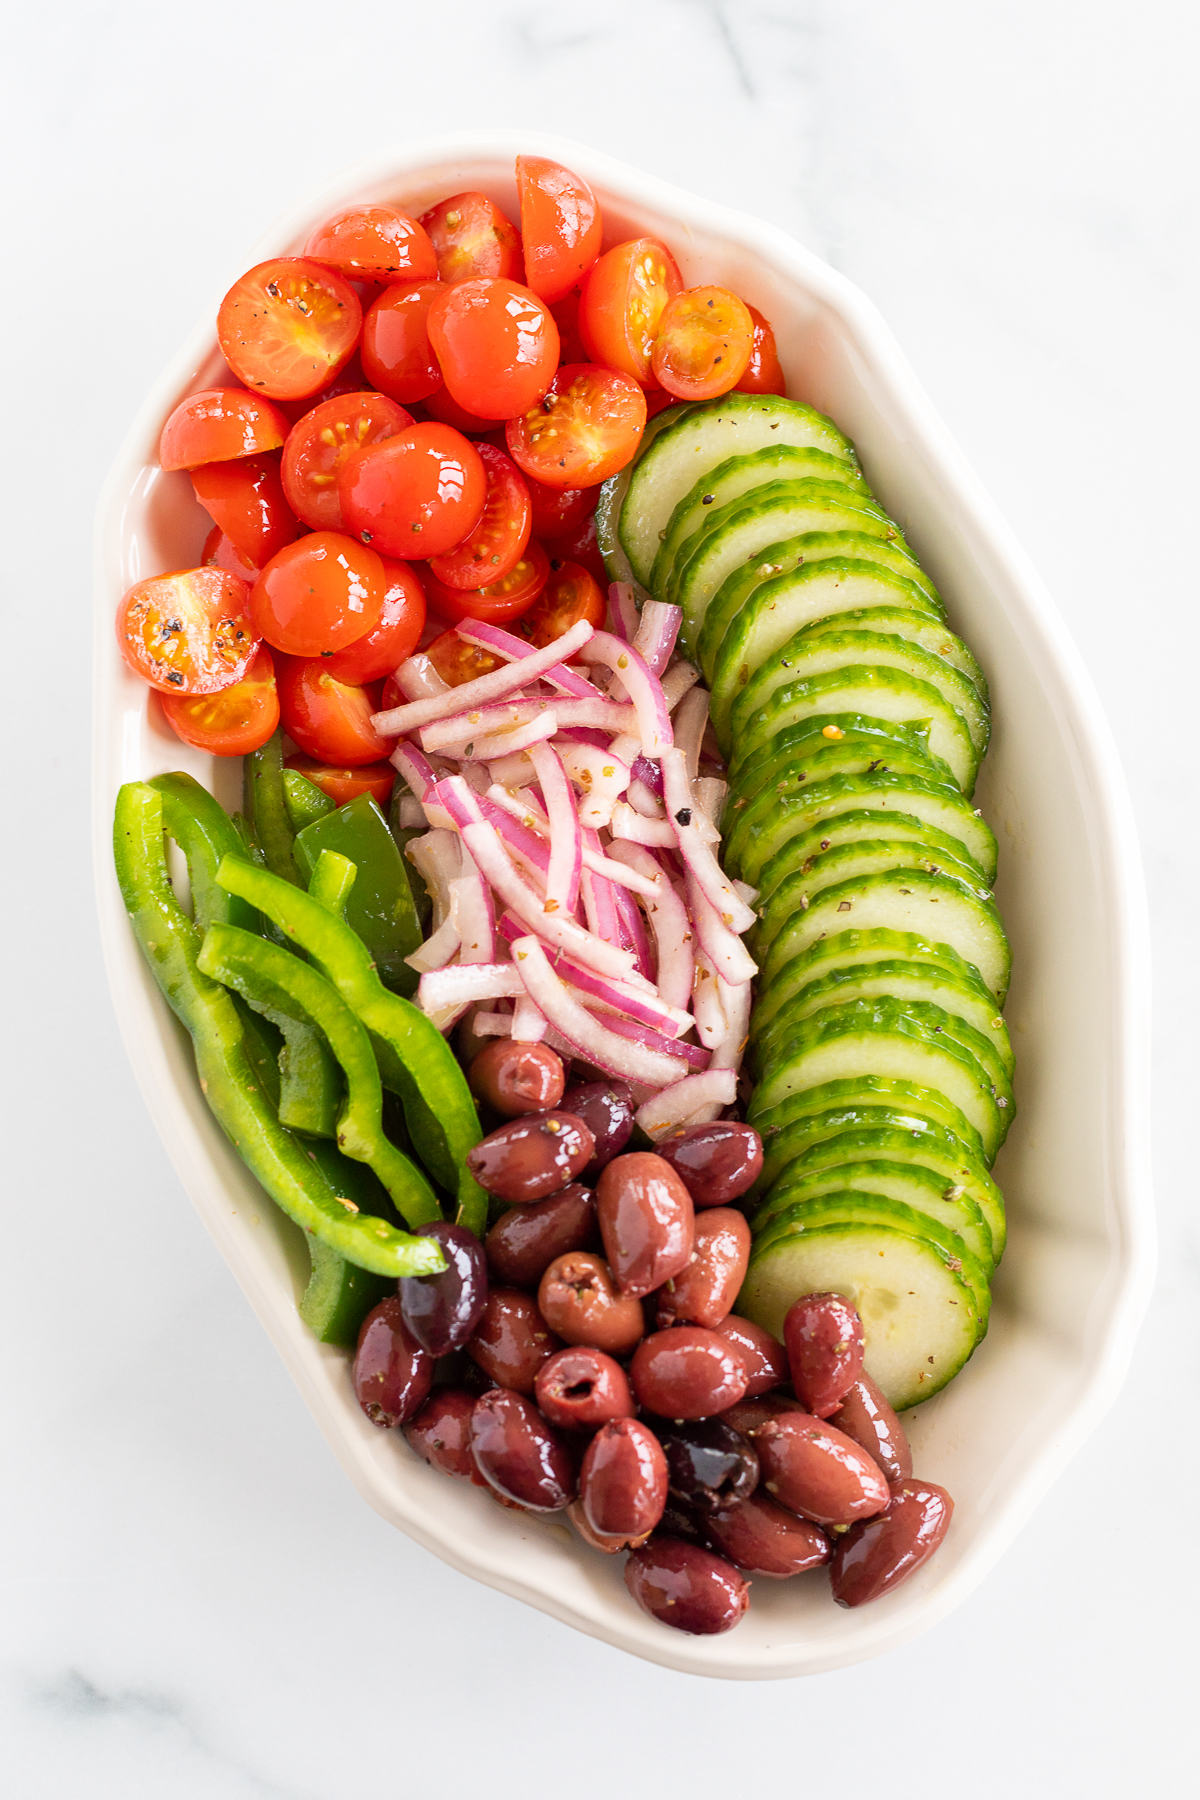 Platter with ingredients for Greek salad, including cherry tomatoes, green pepper, red onion, cucumbers, and olives